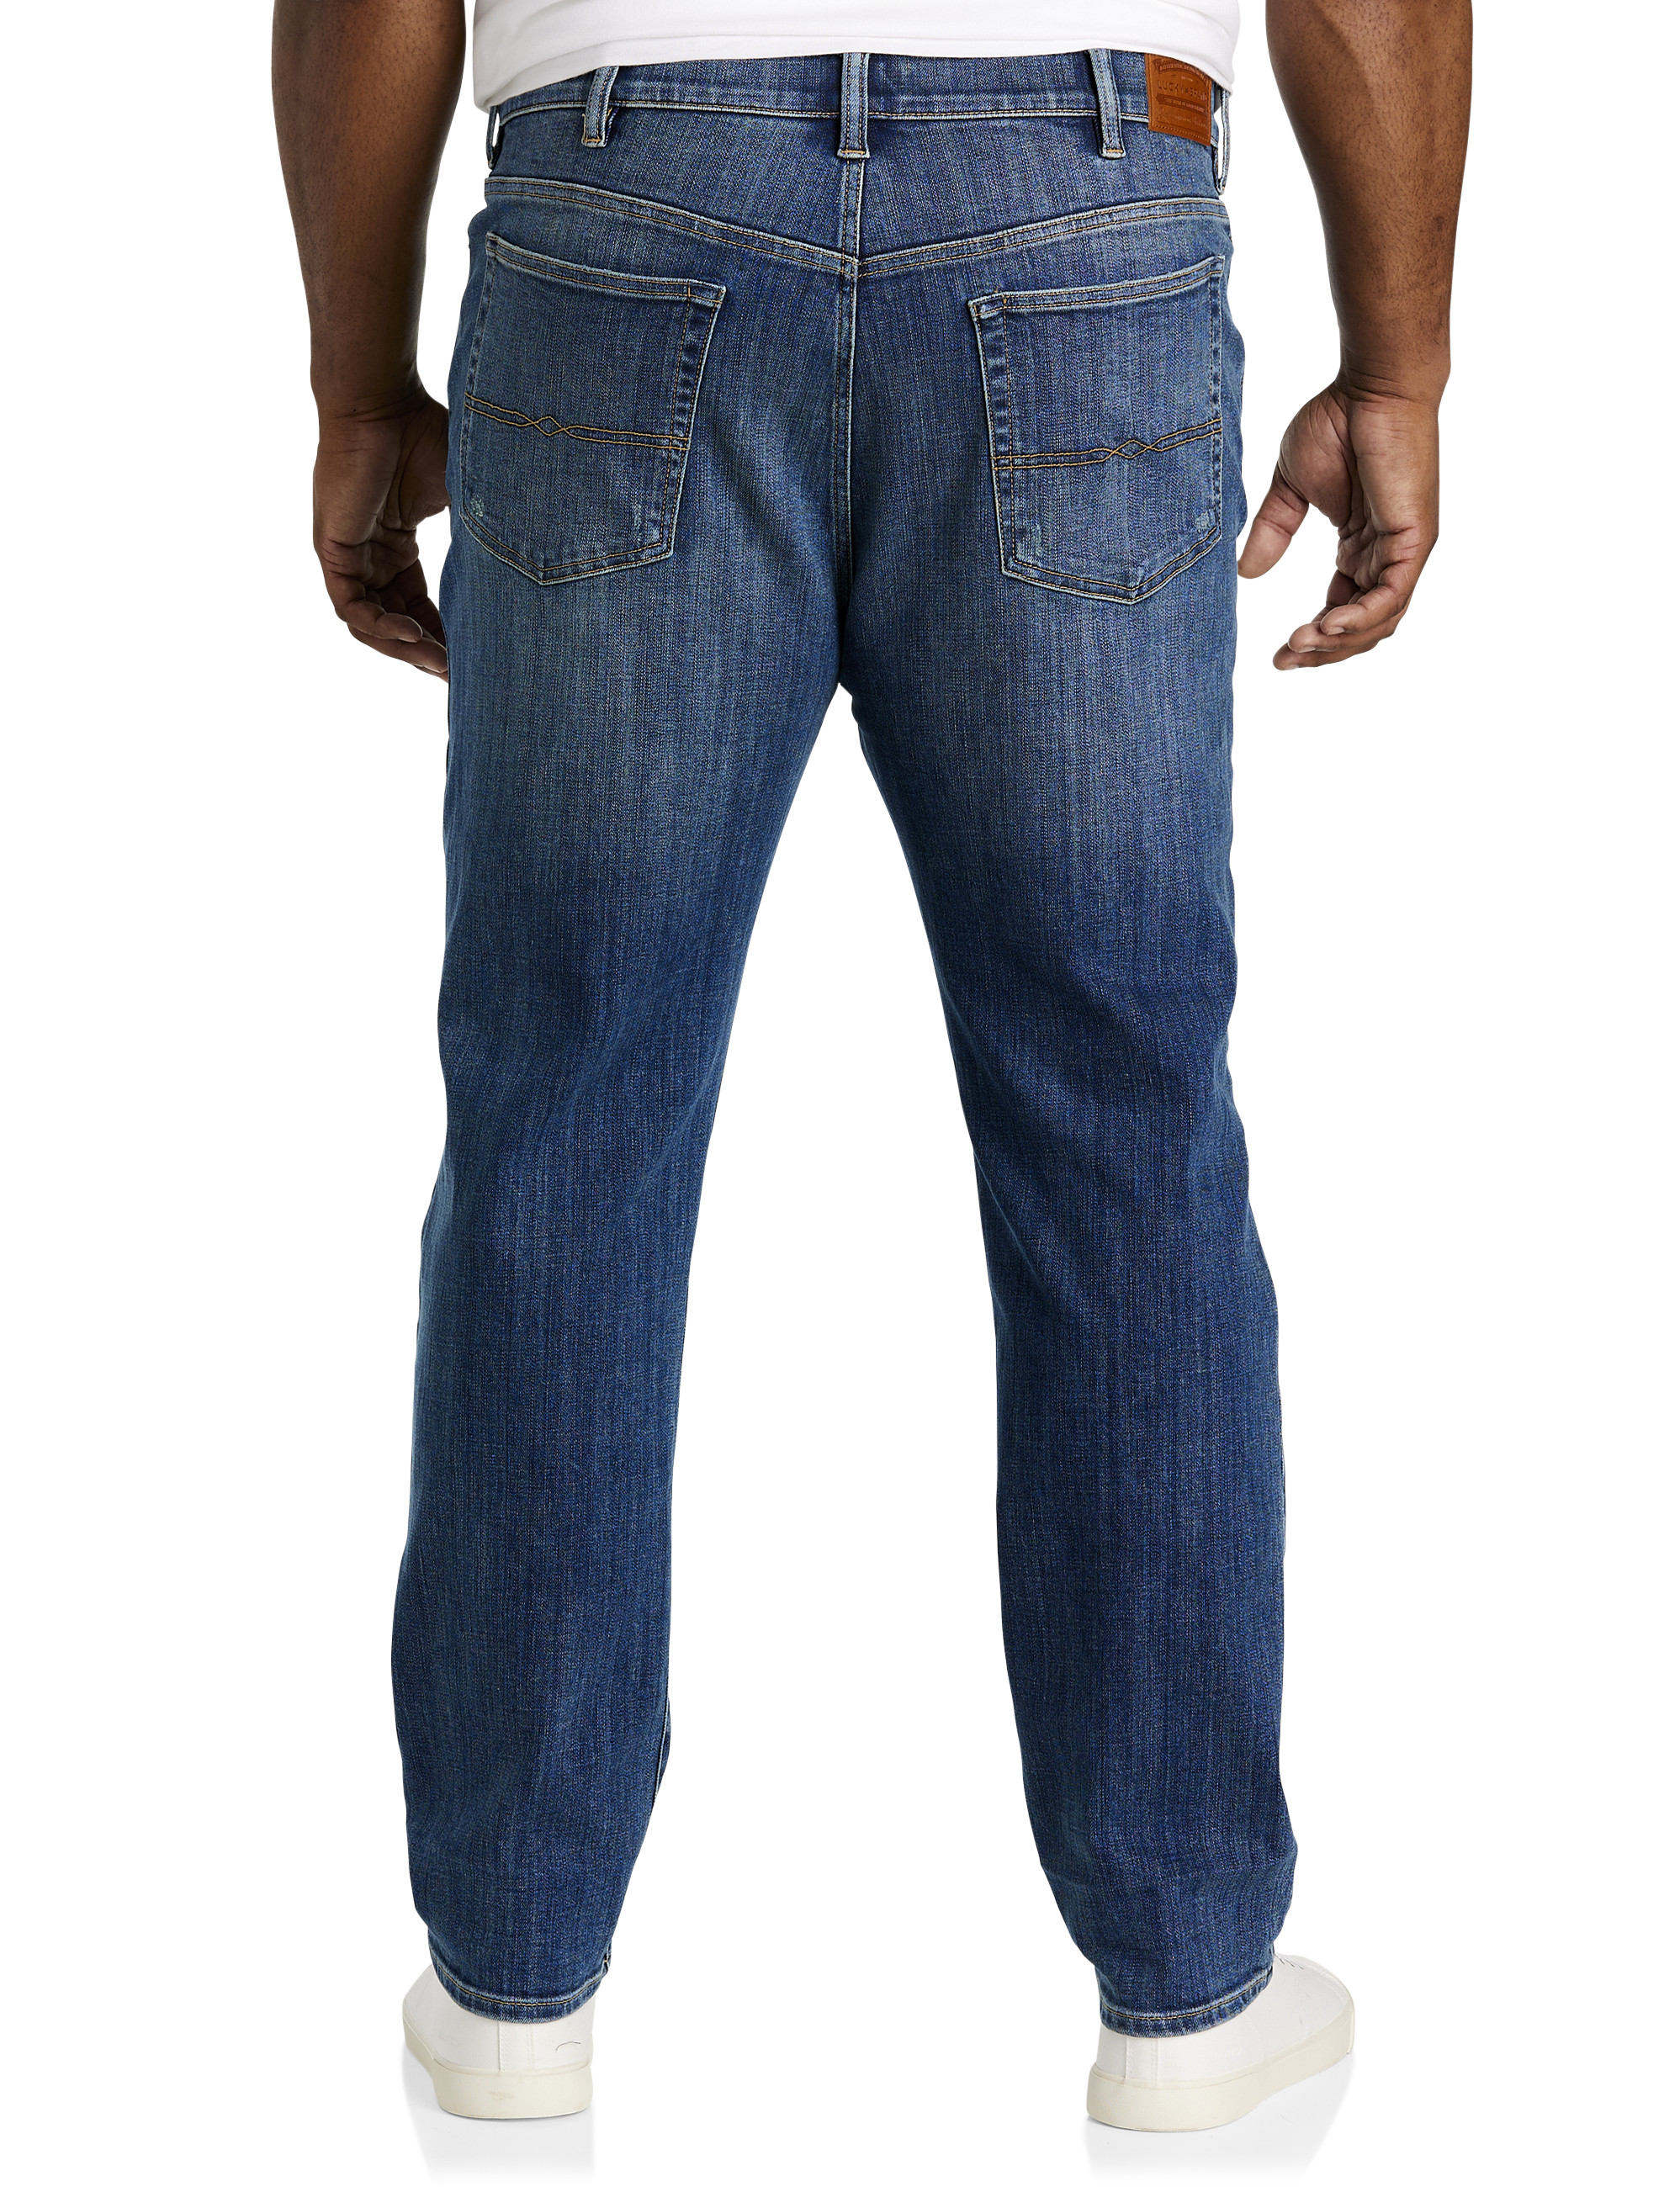 Lucky Brand Lakewood Jean - Hensley's Big and Tall